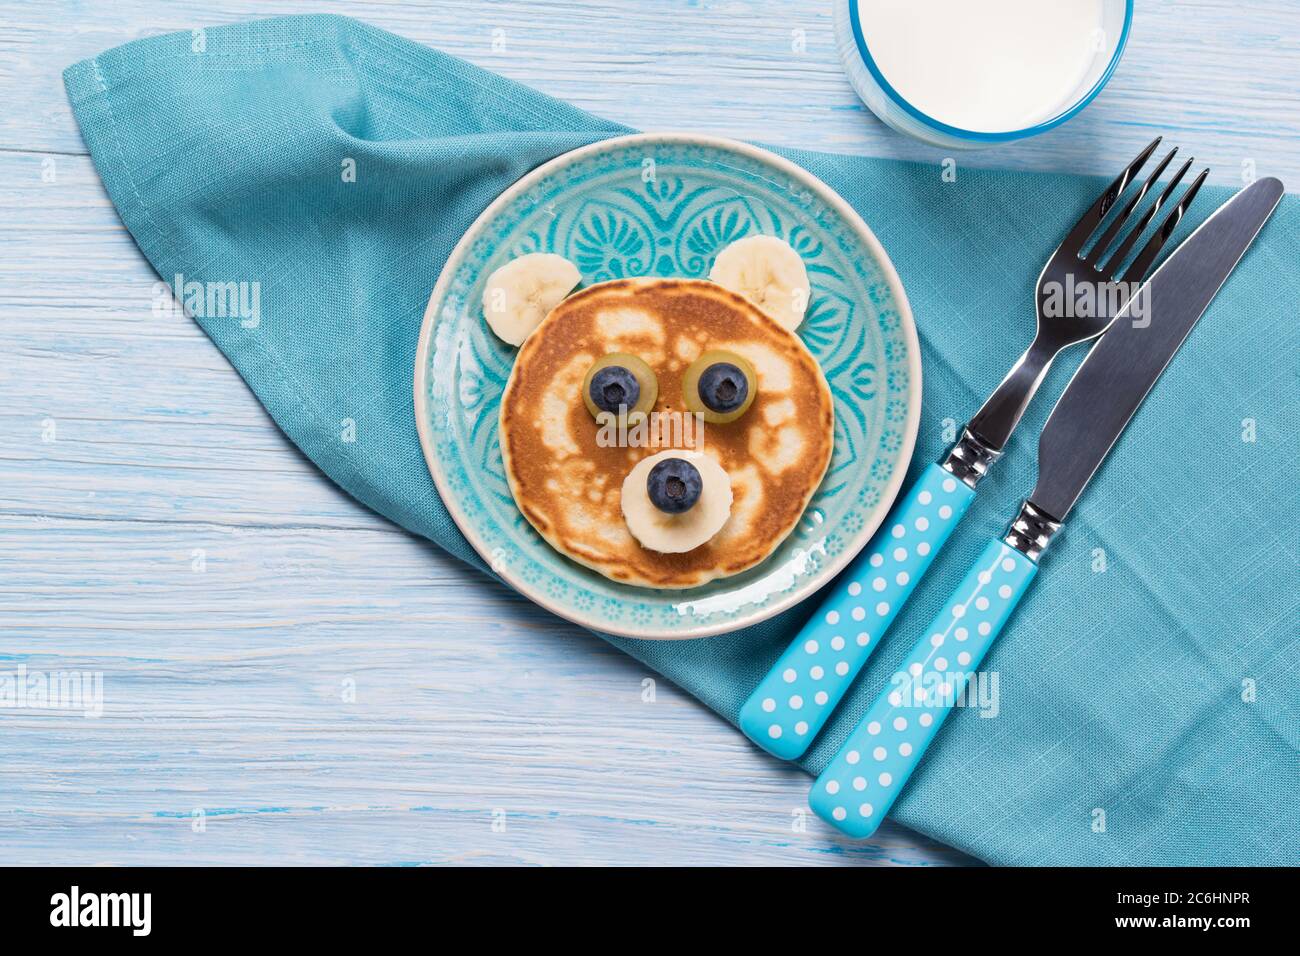 Funny pancake in a shape of teddy bear, food for kids idea, top view Stock Photo